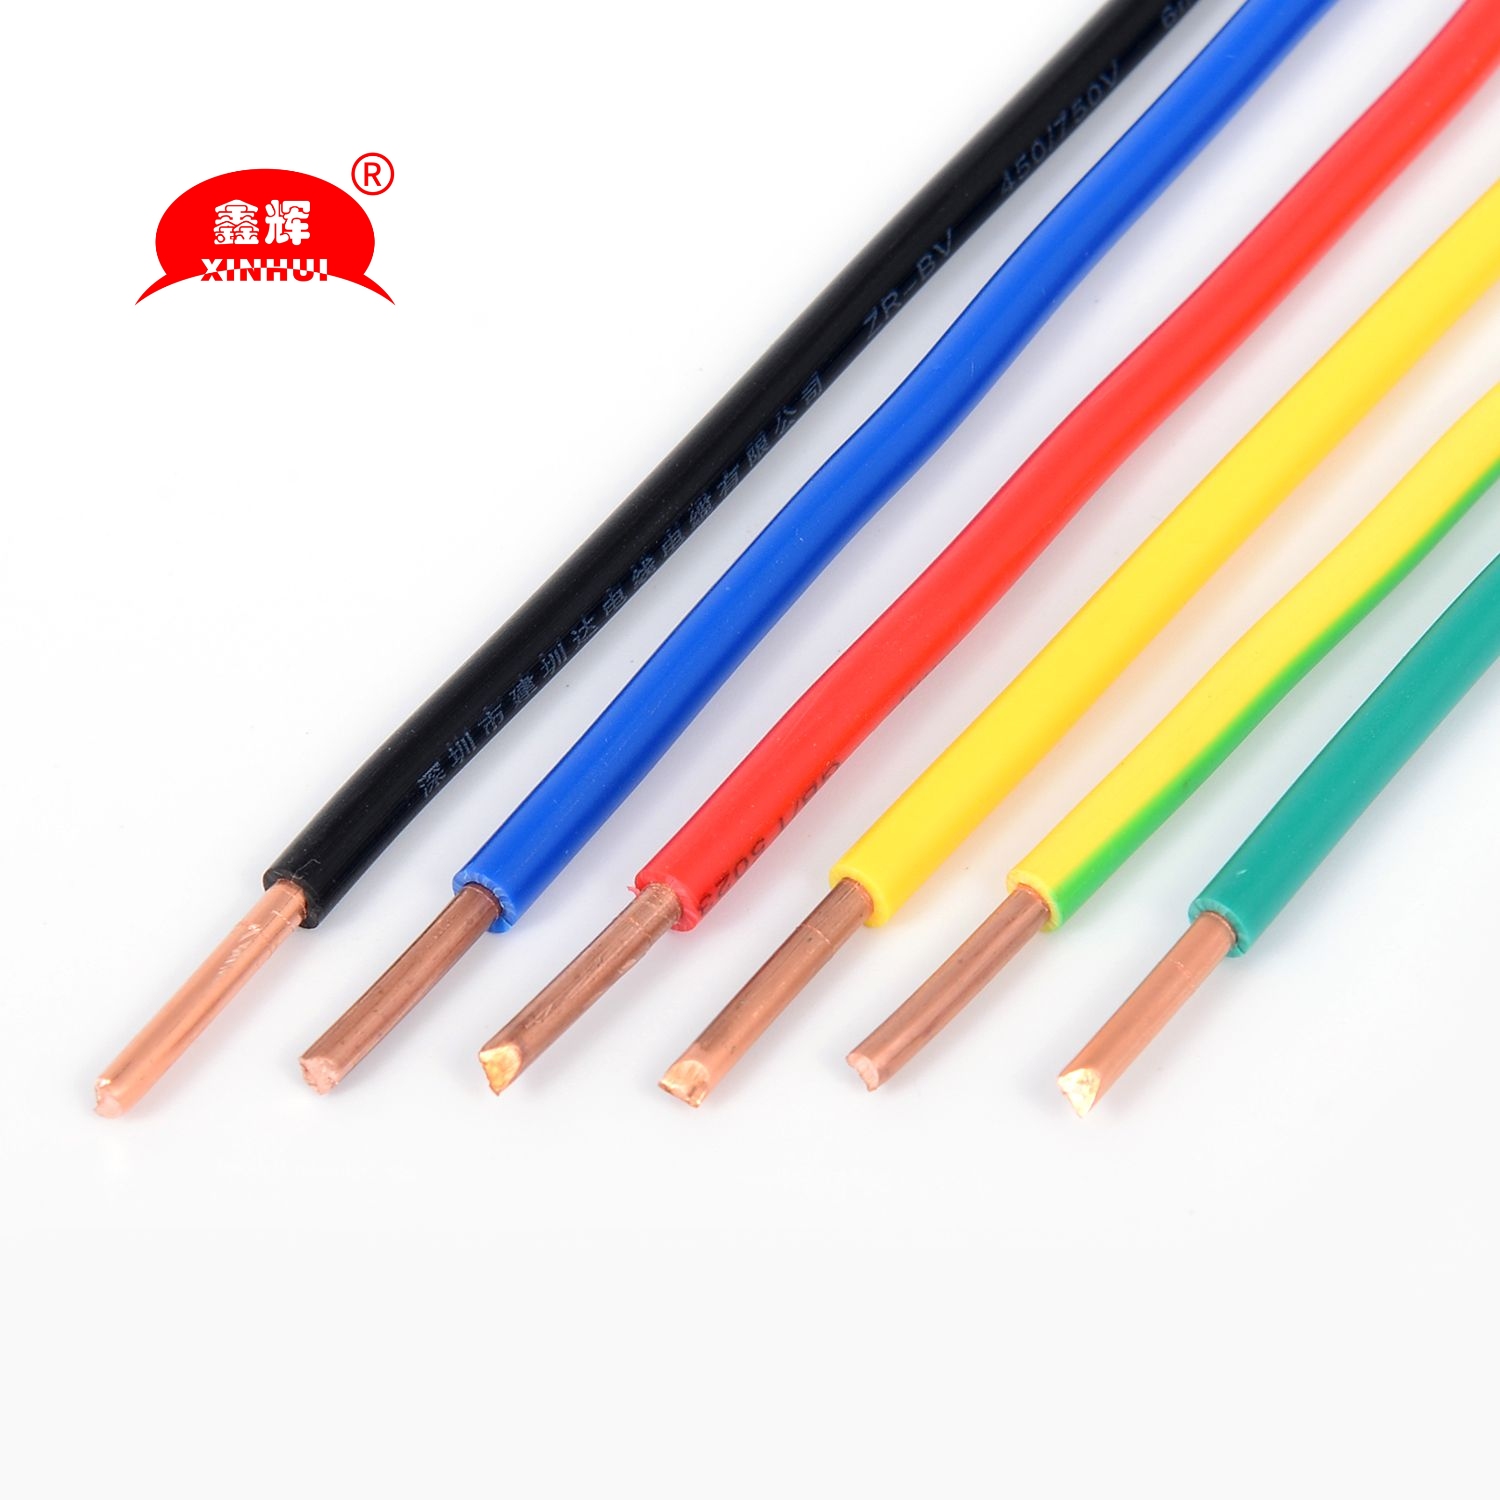 BV Solid Copper Single Core PVC Insulated Sheathless Electrical Wire